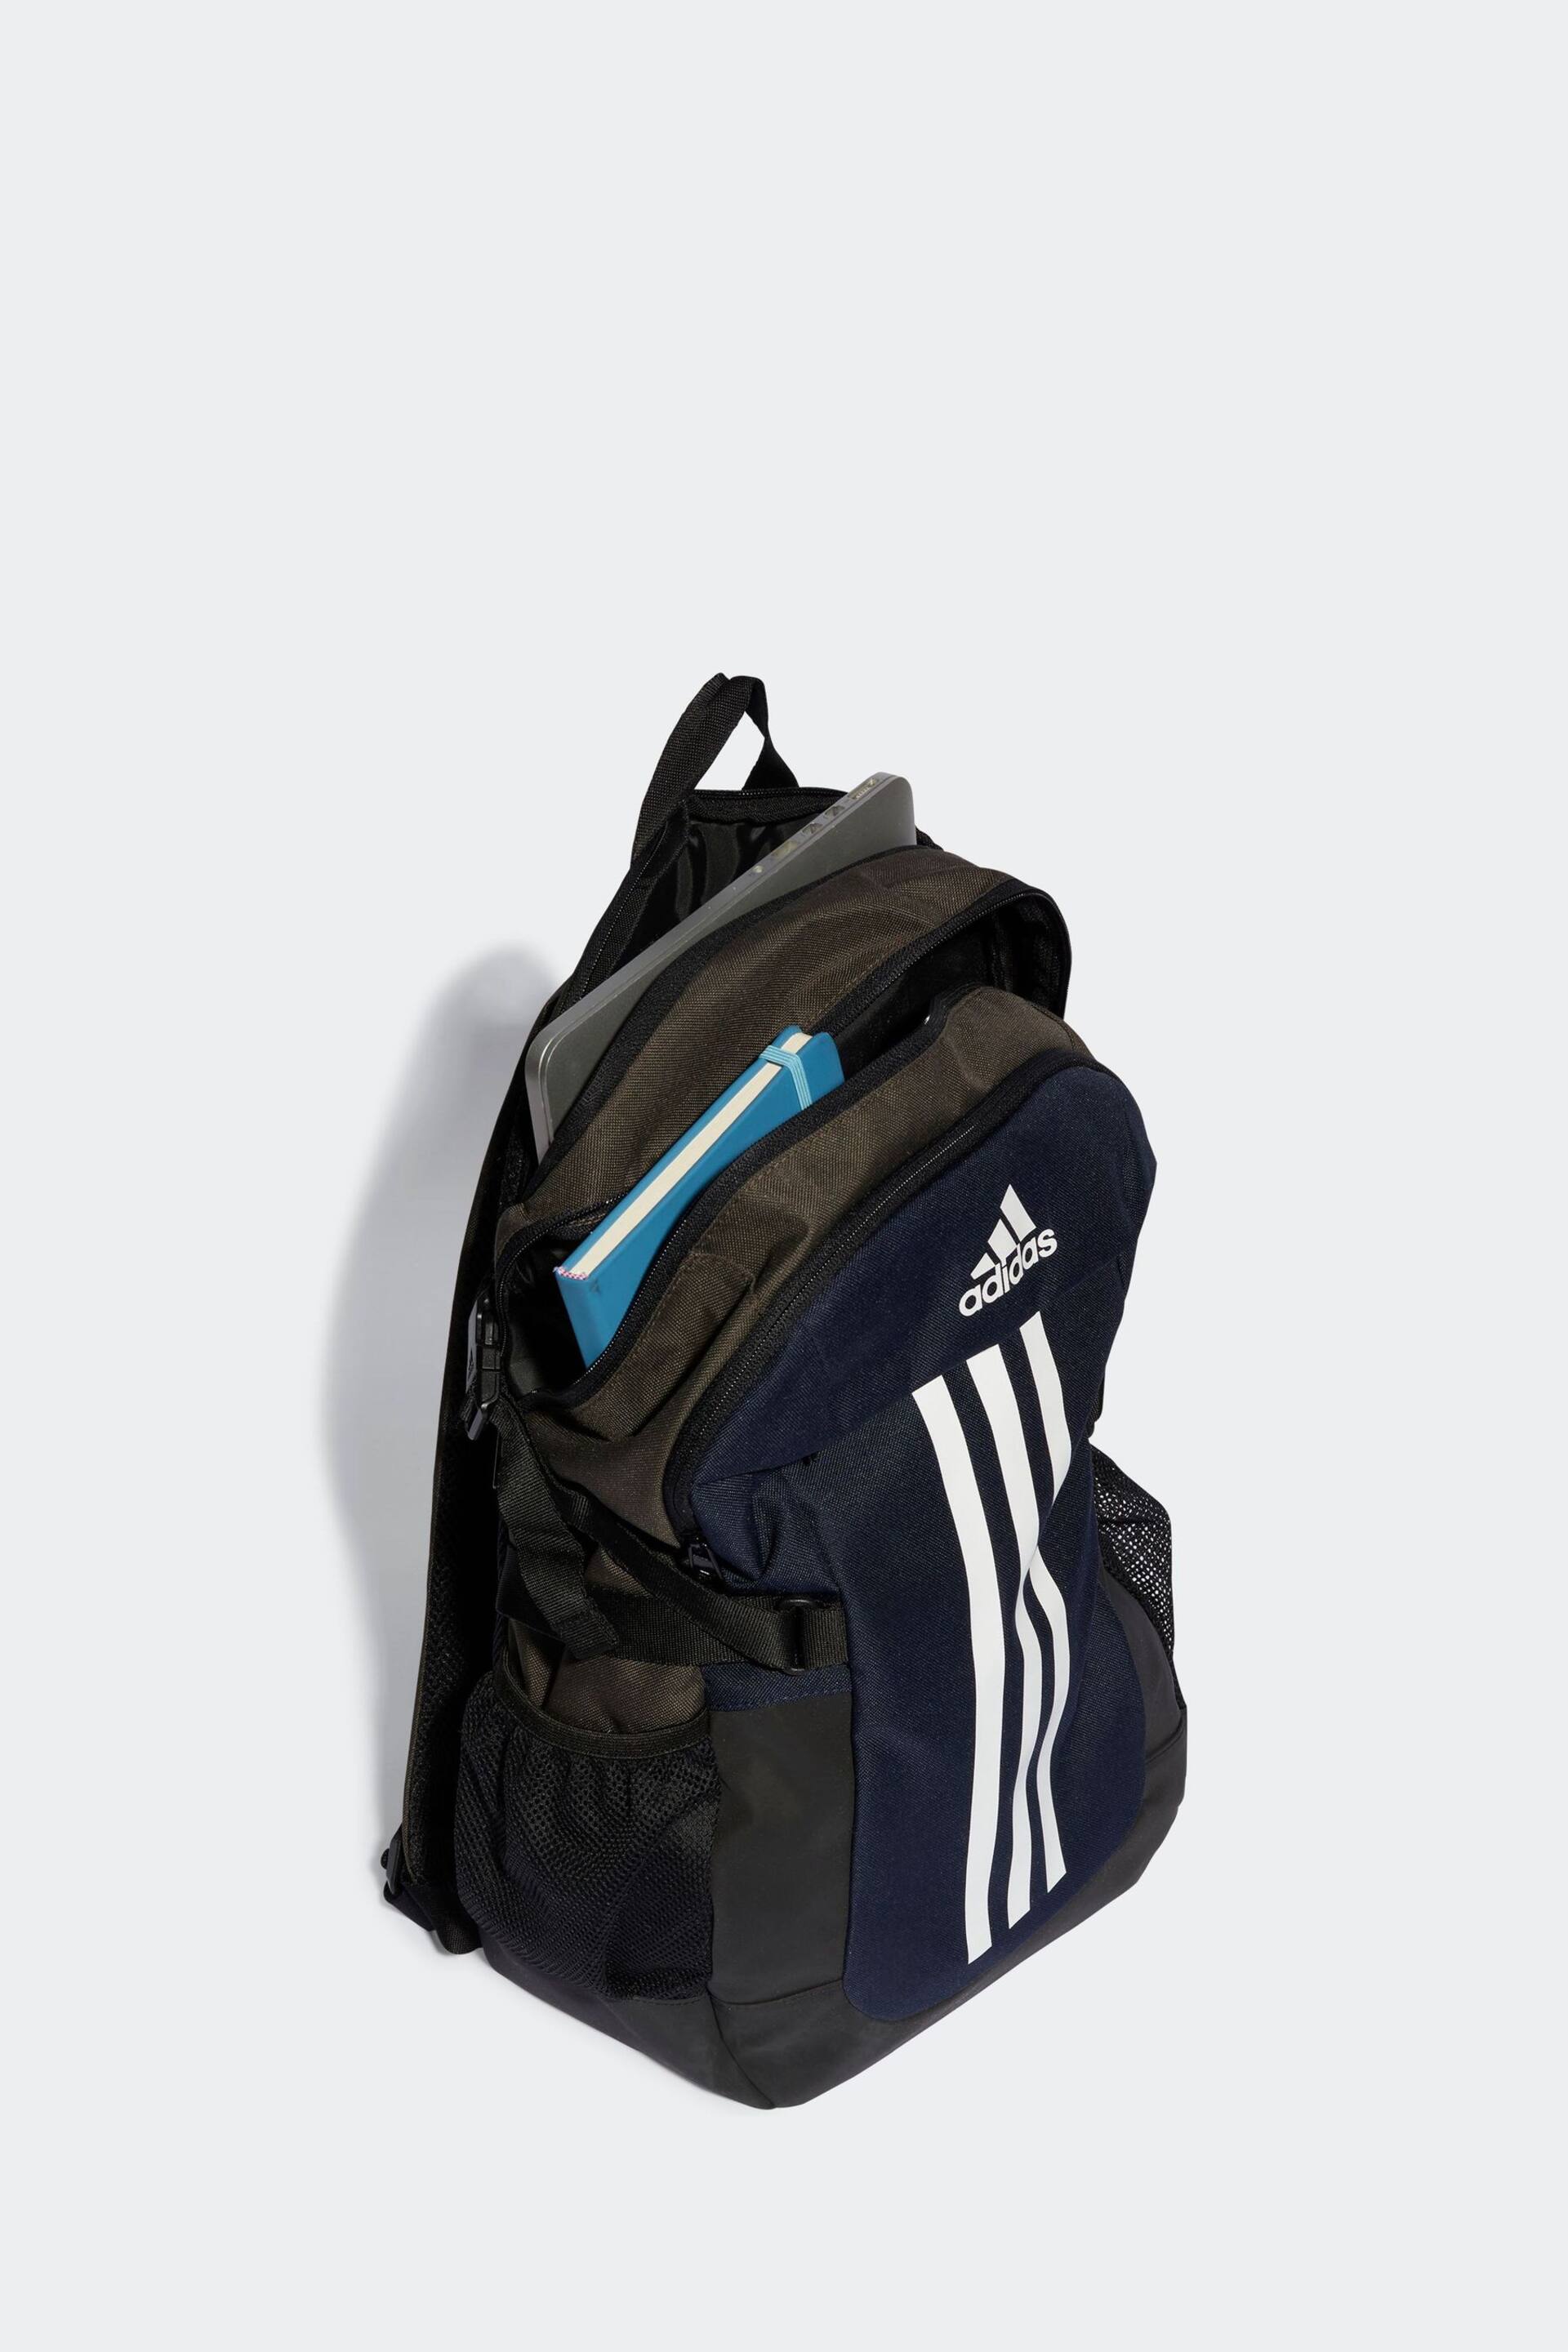 adidas Green Power Backpack - Image 4 of 6